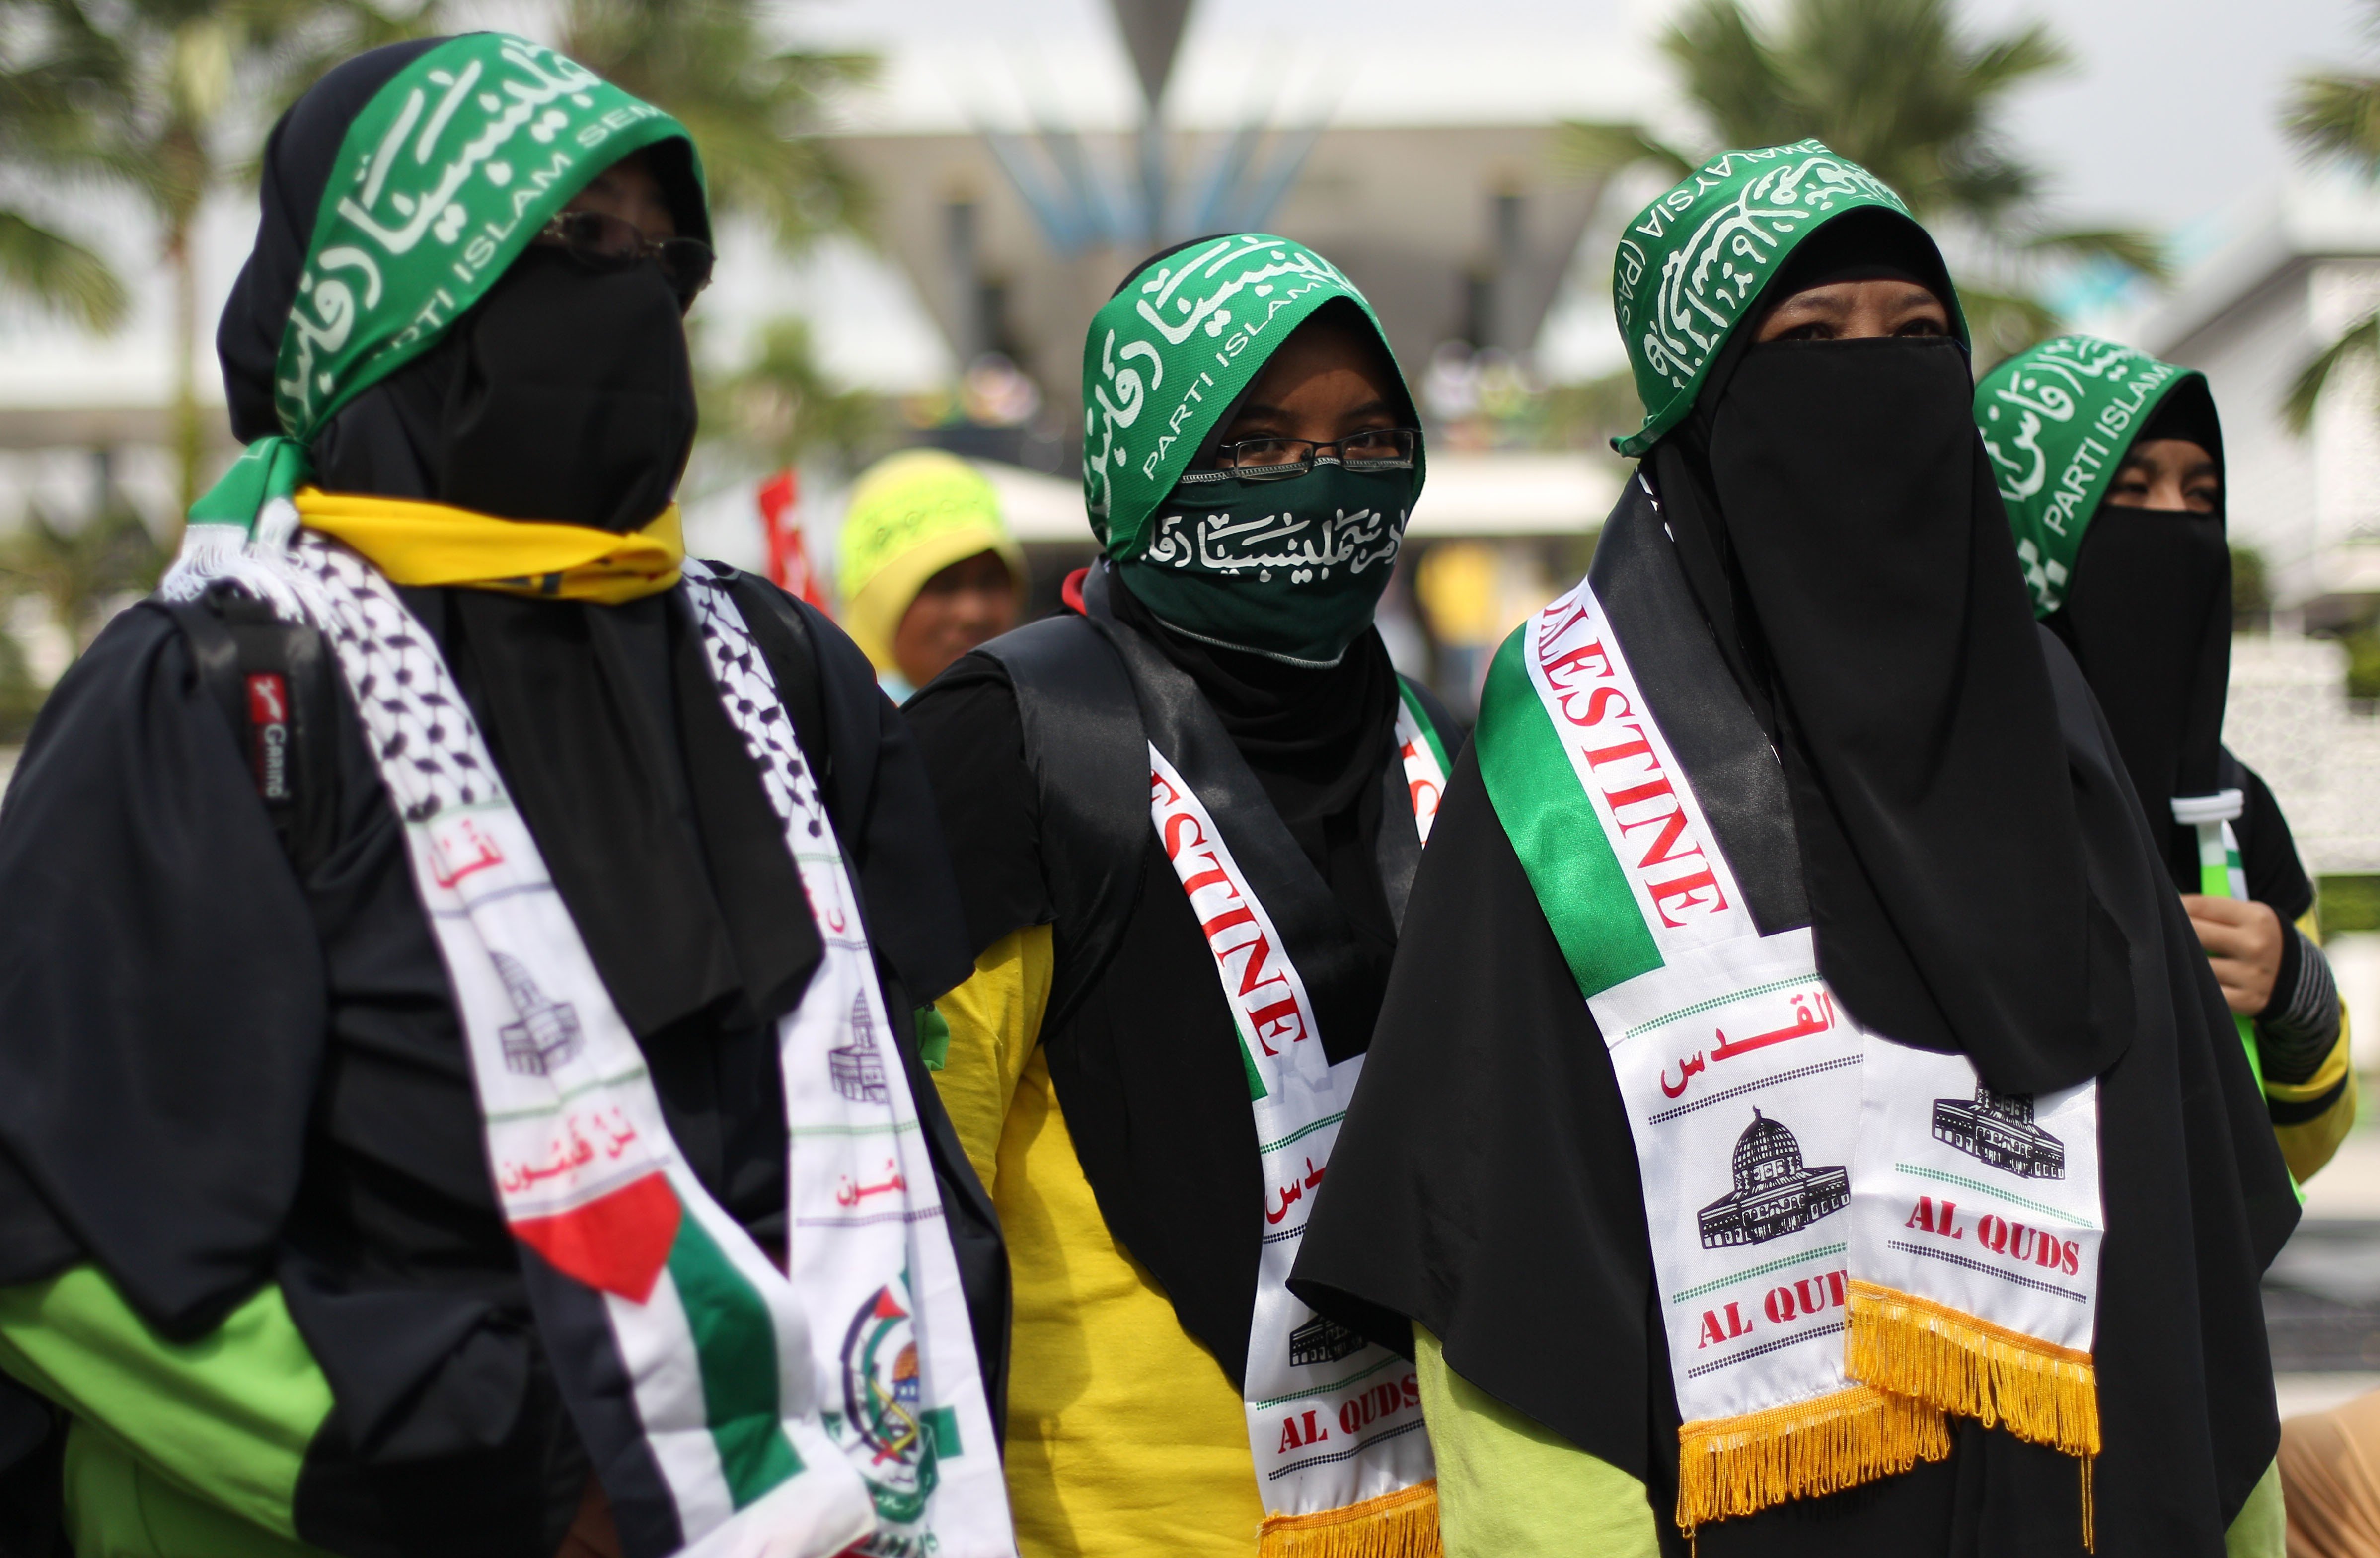 Protesters wearing headbands of the Parti Islam SeMalaysia demonstrate against a voting system they say is rigged in favour of the ruling Barisan Nasional coalition in 2013. Malaysia’s general election this year will be a test of the rise of political Islam in the country. Photo: AFP